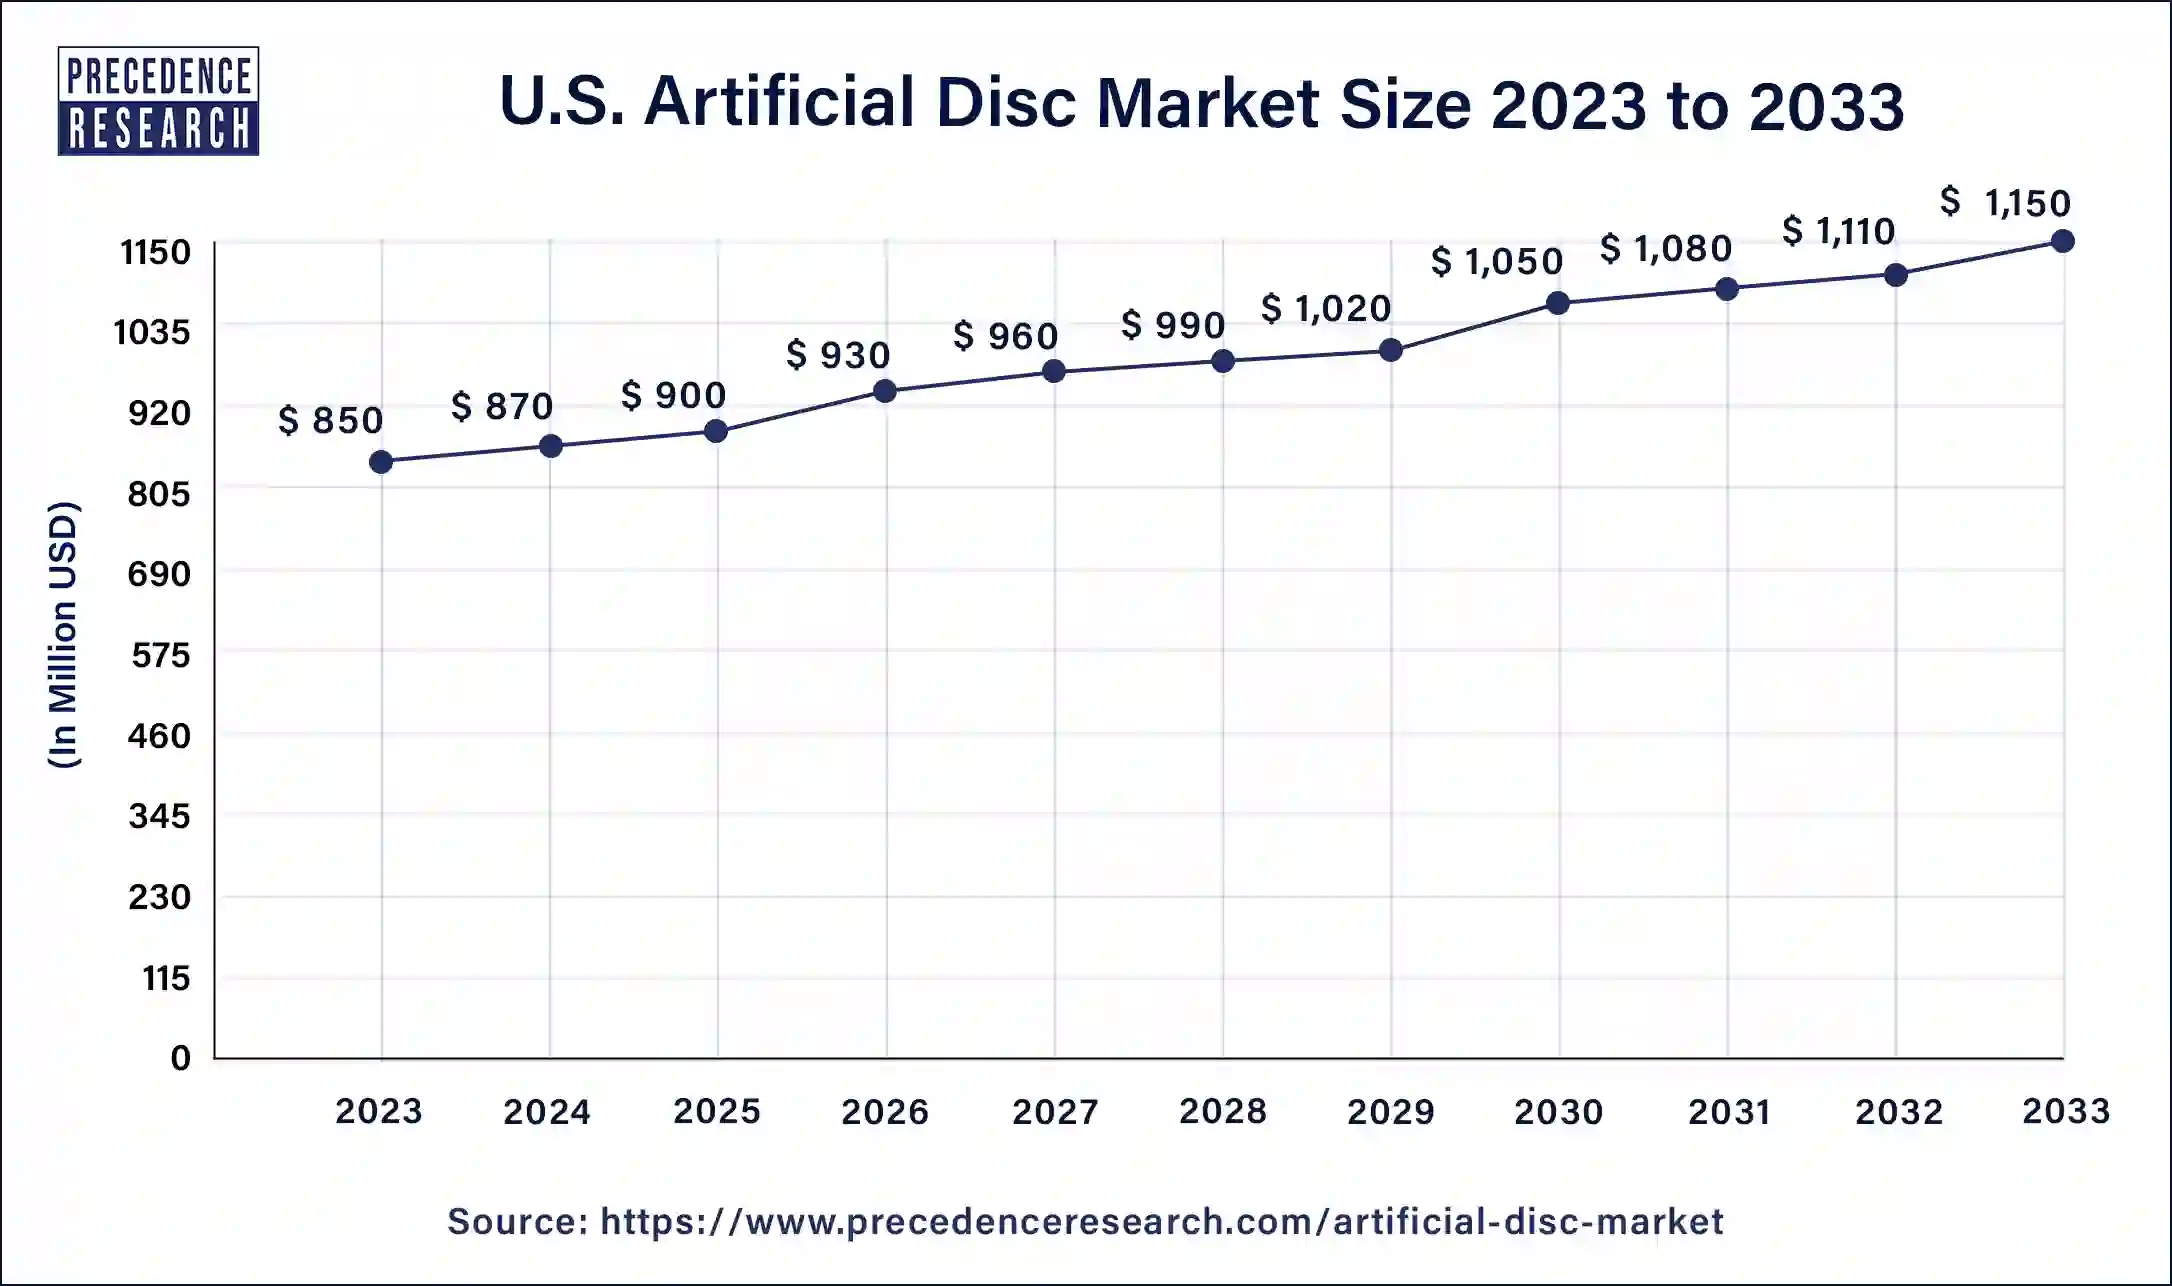 U.S. Artificial Disc Market Size 2024 to 2033